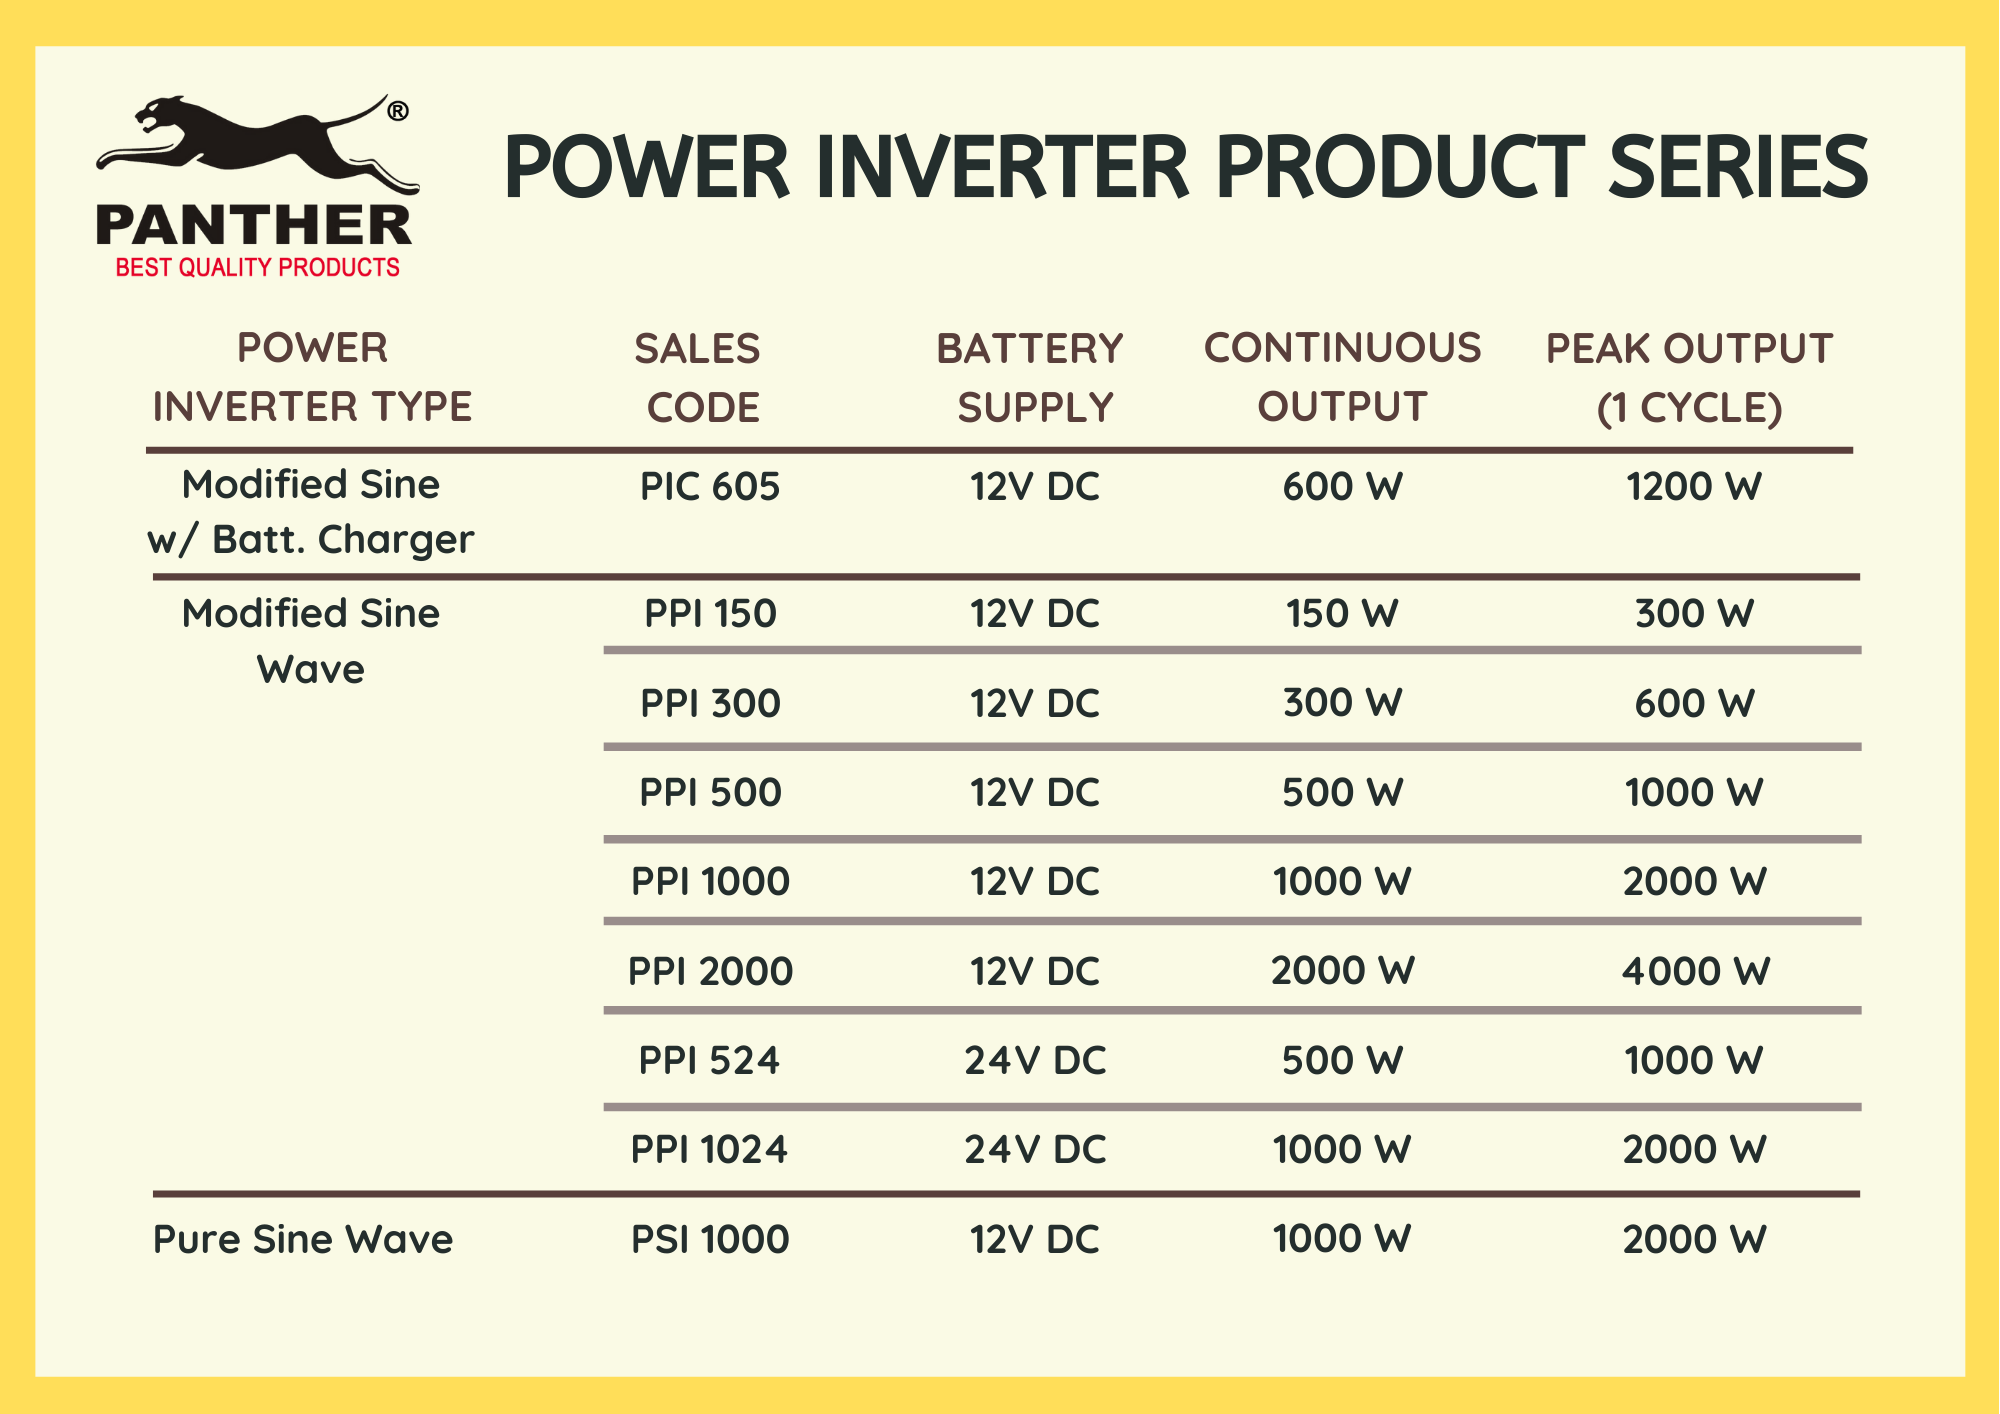 List of available Panther Power Inverters models